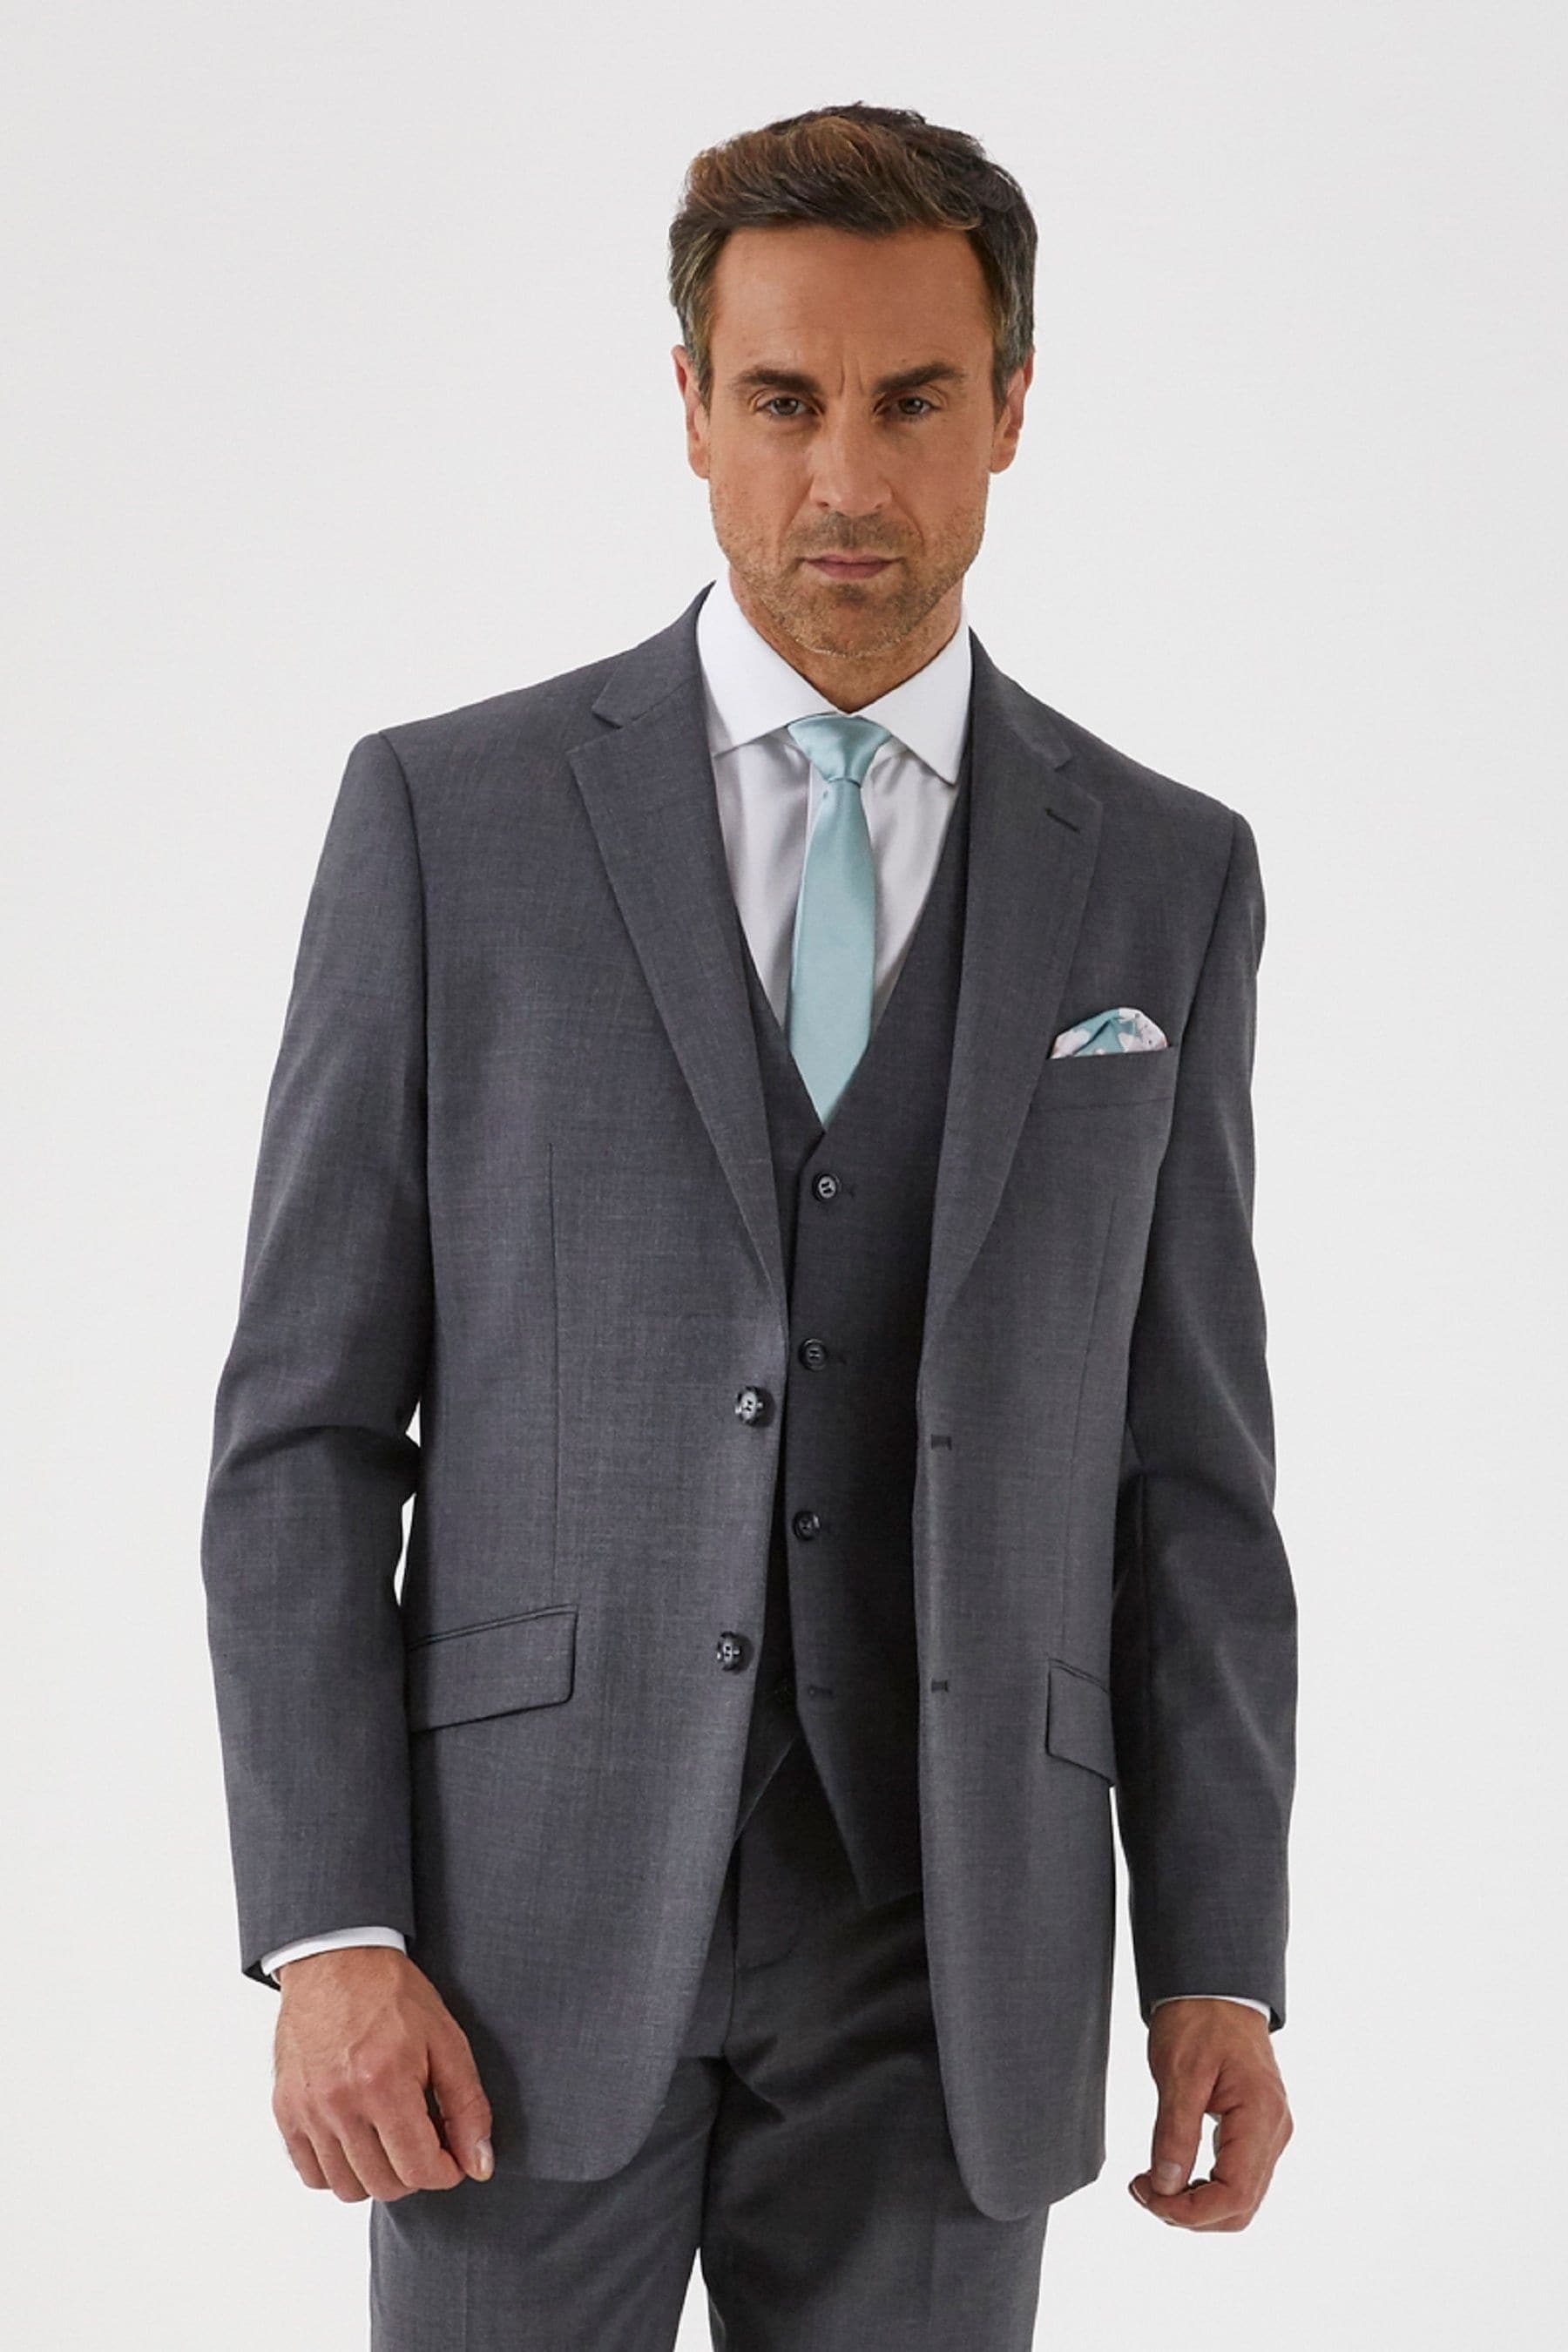 Buy Skopes Darwin Grey Classic Fit Suit Jacket from the Next UK online shop